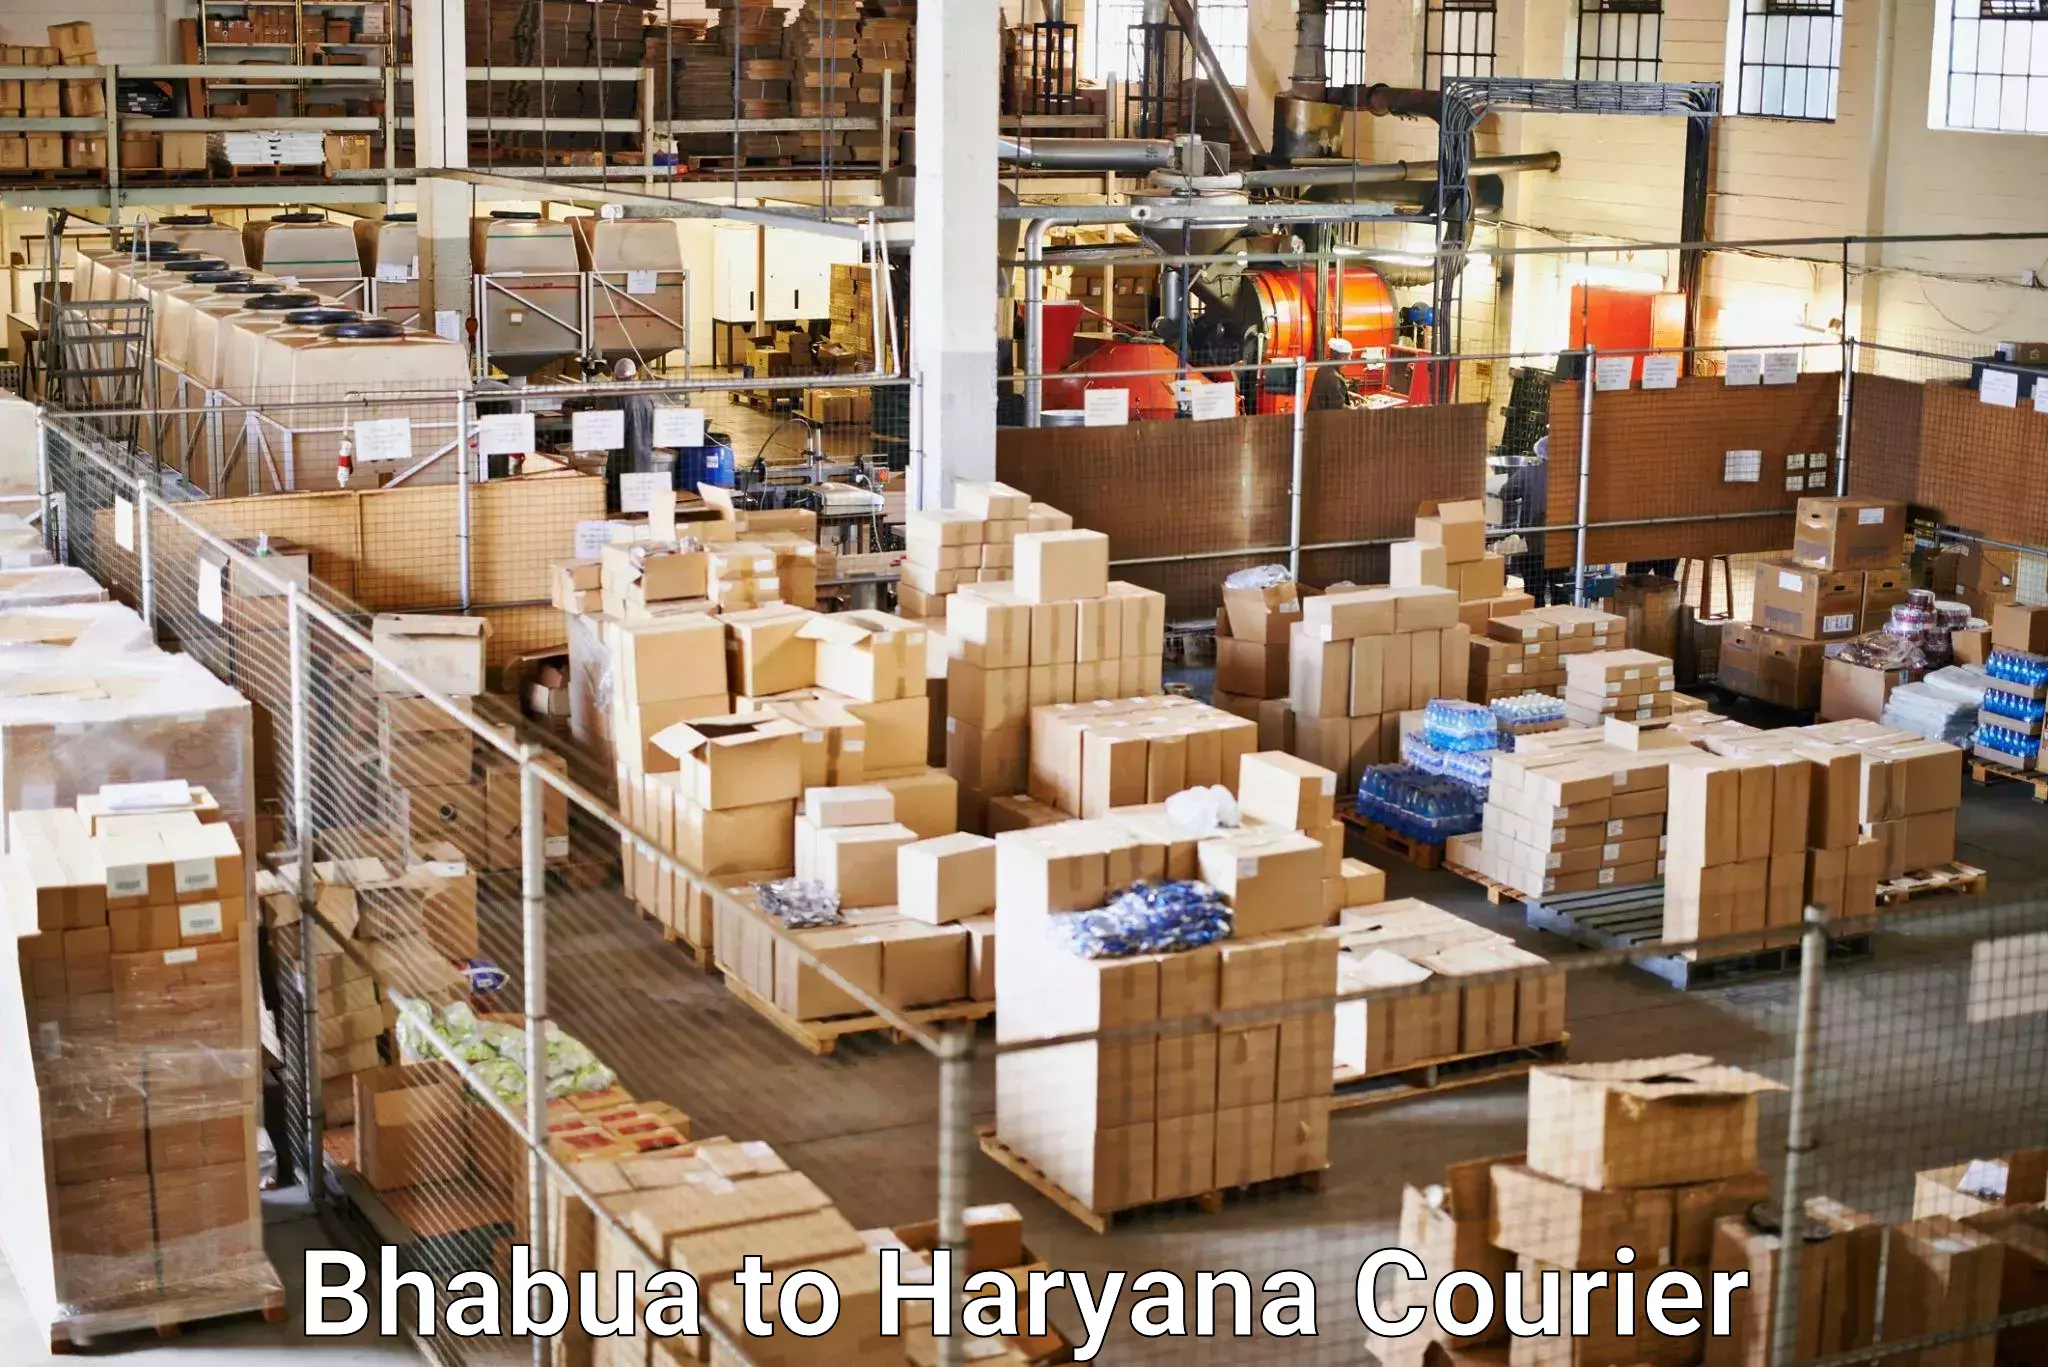 Next-day freight services Bhabua to Chaudhary Charan Singh Haryana Agricultural University Hisar